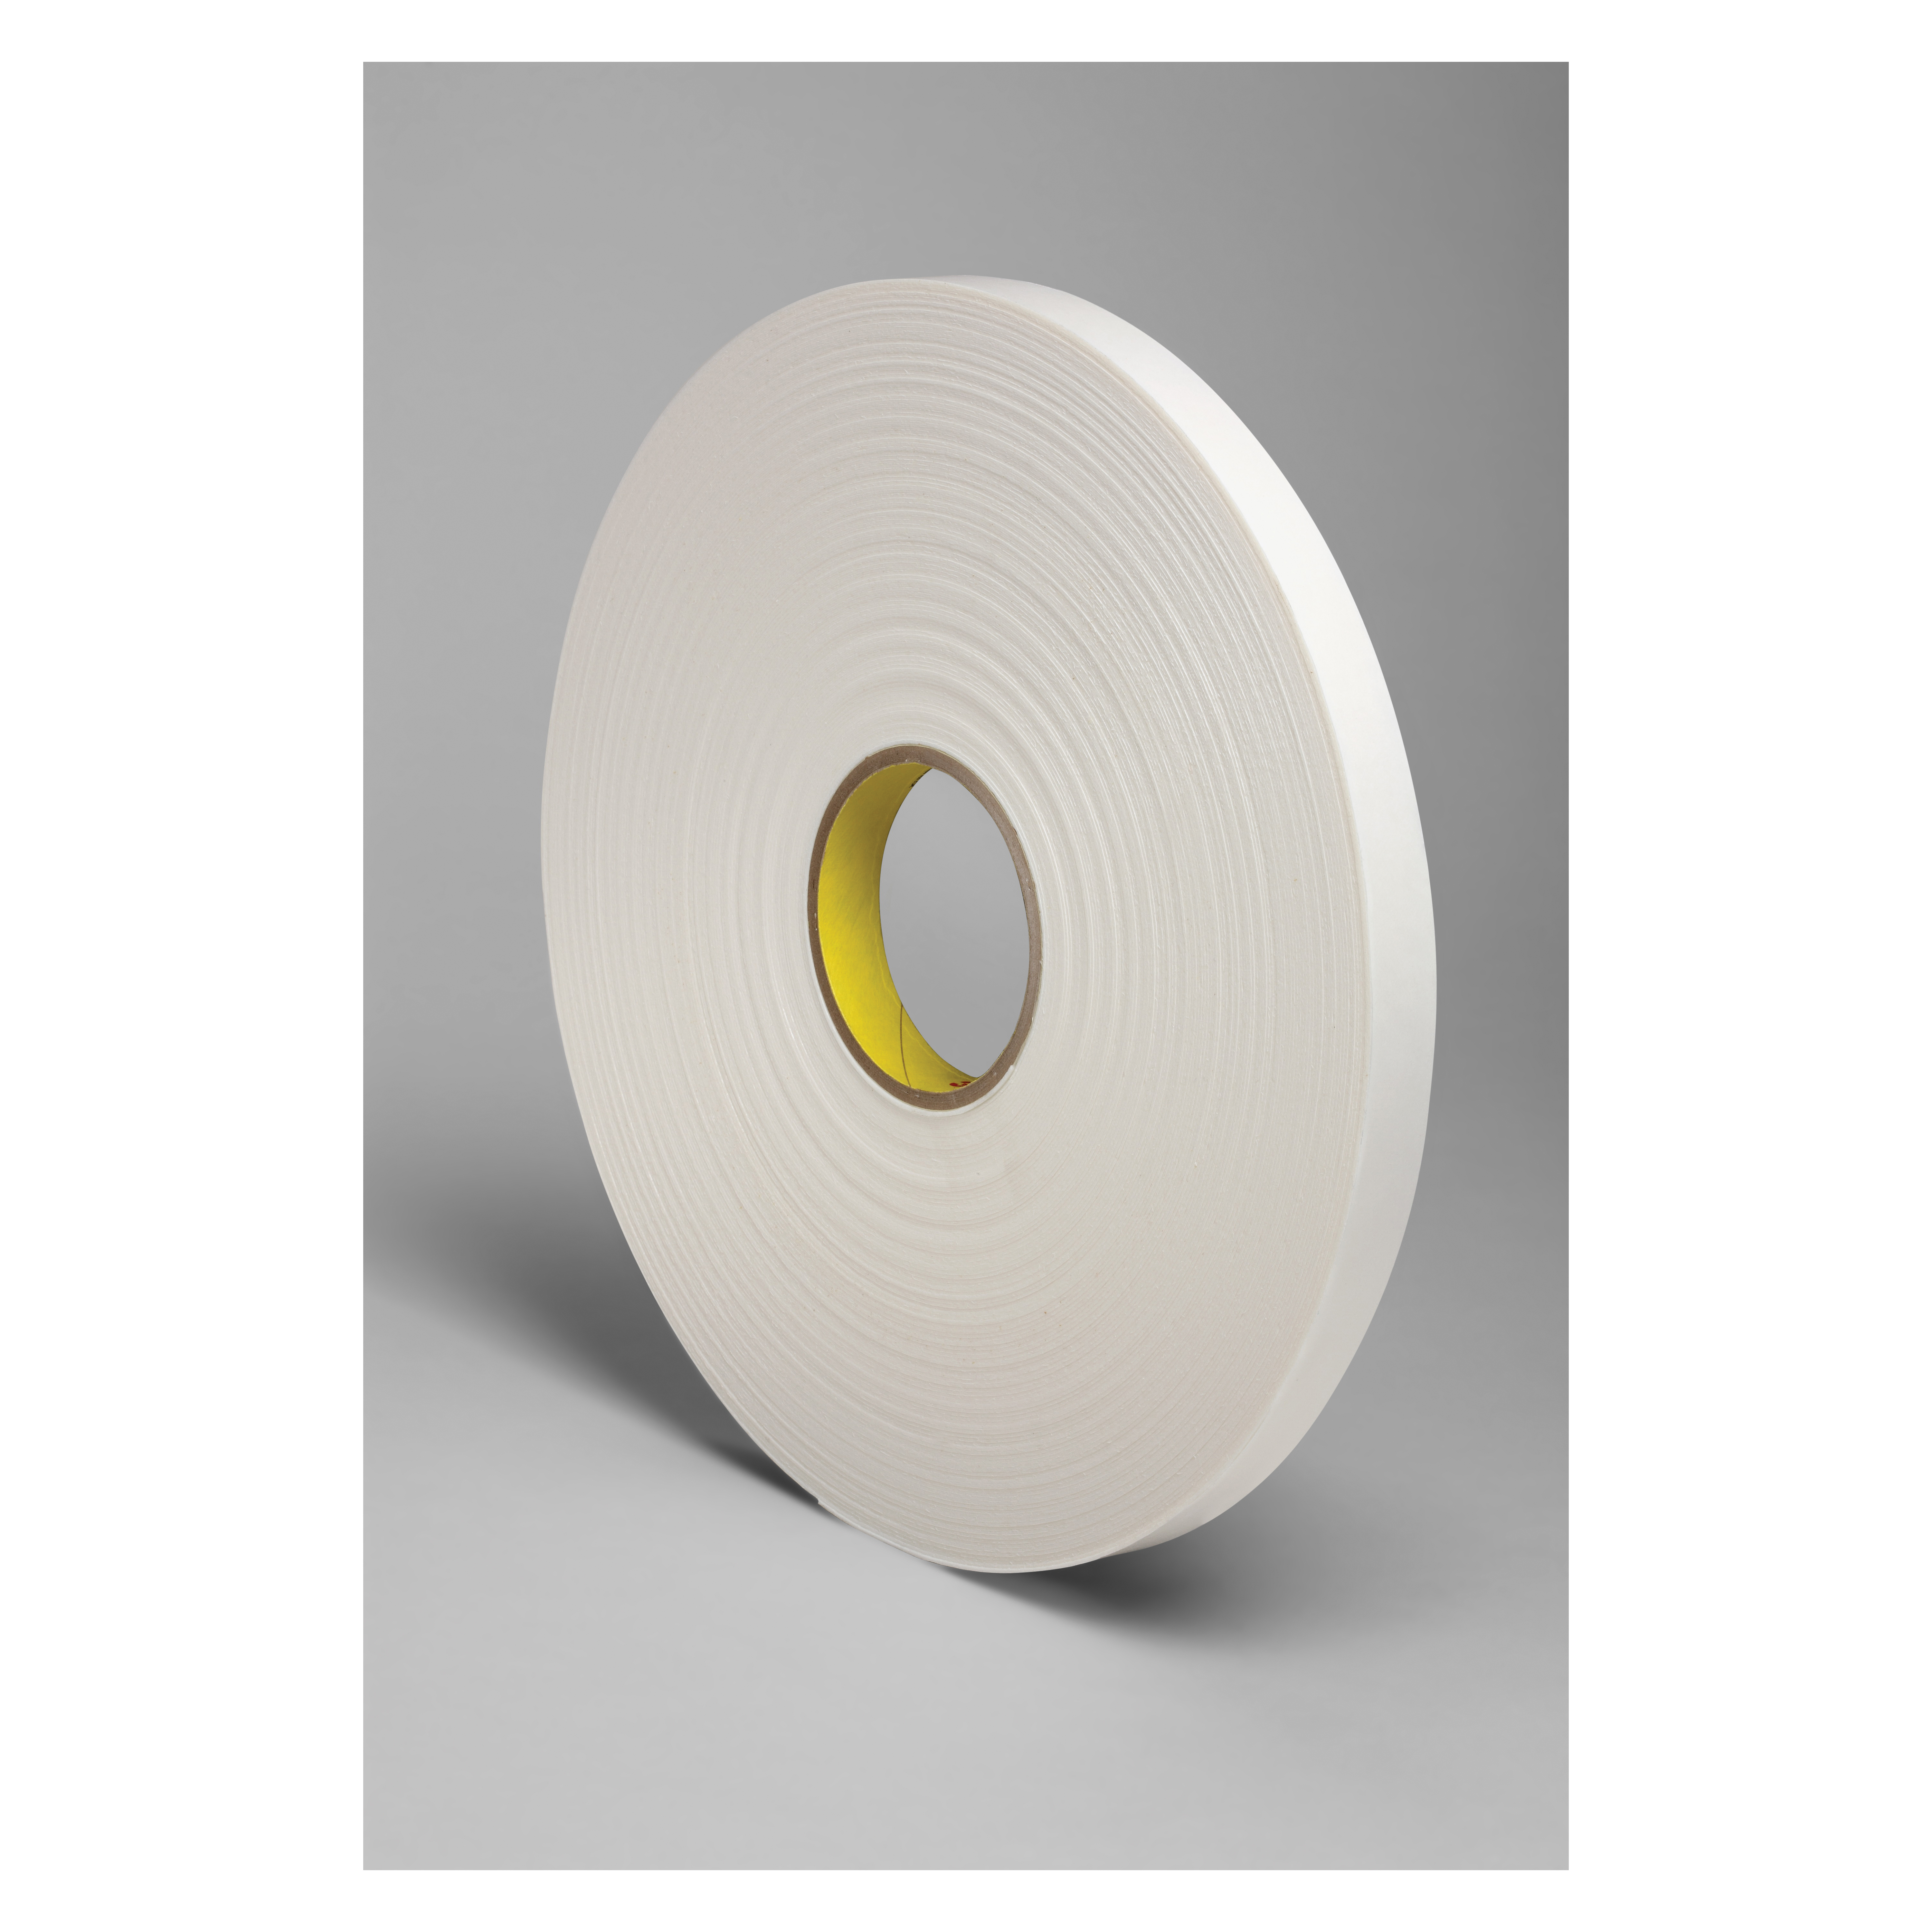 3M™ 021200-04872 Single Coated Foam Tape, 18 yd L x 2 in W, 250 mil THK, Acrylic Adhesive, Urethane Foam Backing, Natural